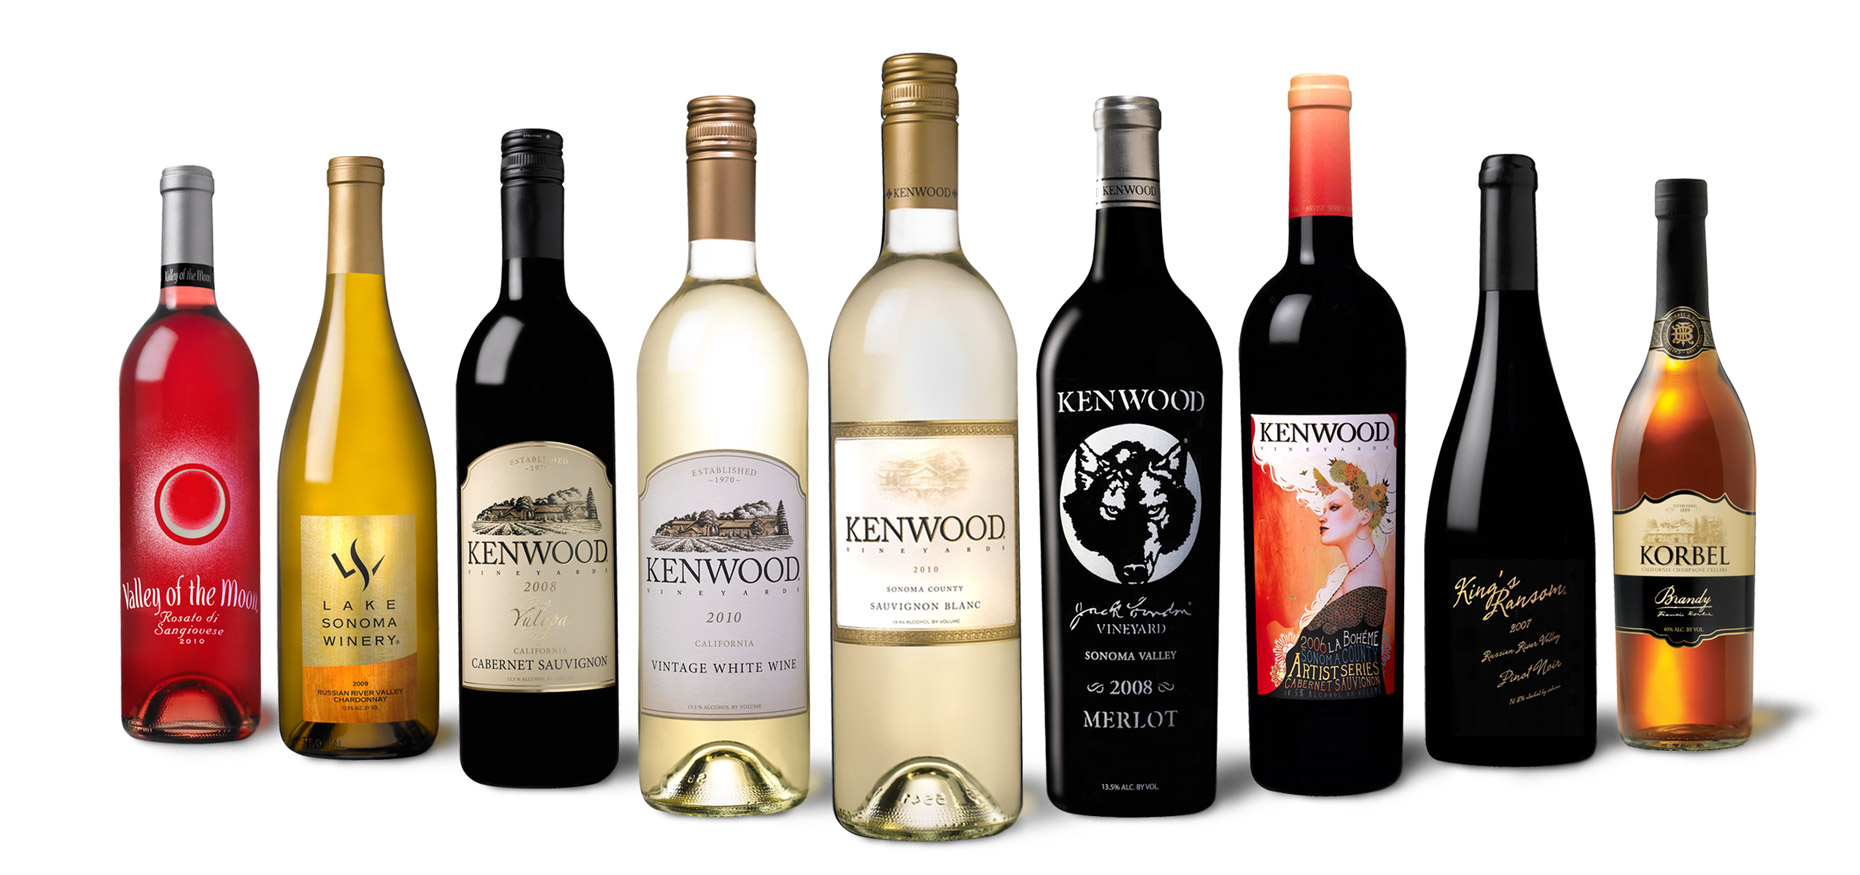 AlanCampbellPhotography, line up of brands of wines and spirits